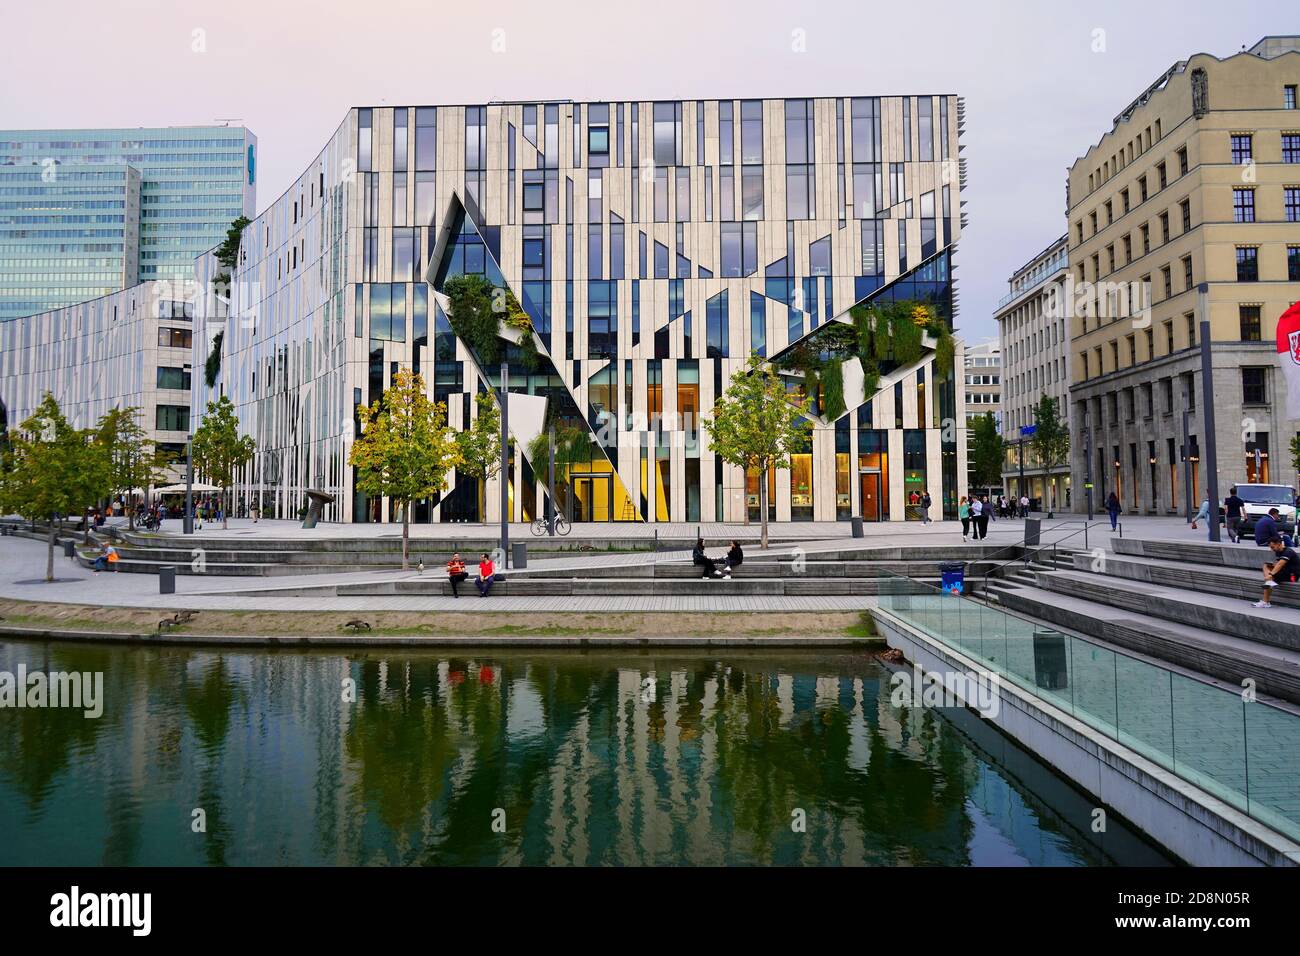 The 'Kö-Bogen', a modern building complex designed by New York star architect Daniel Libeskind, completed in 2013. Warm late summer evening light. Stock Photo